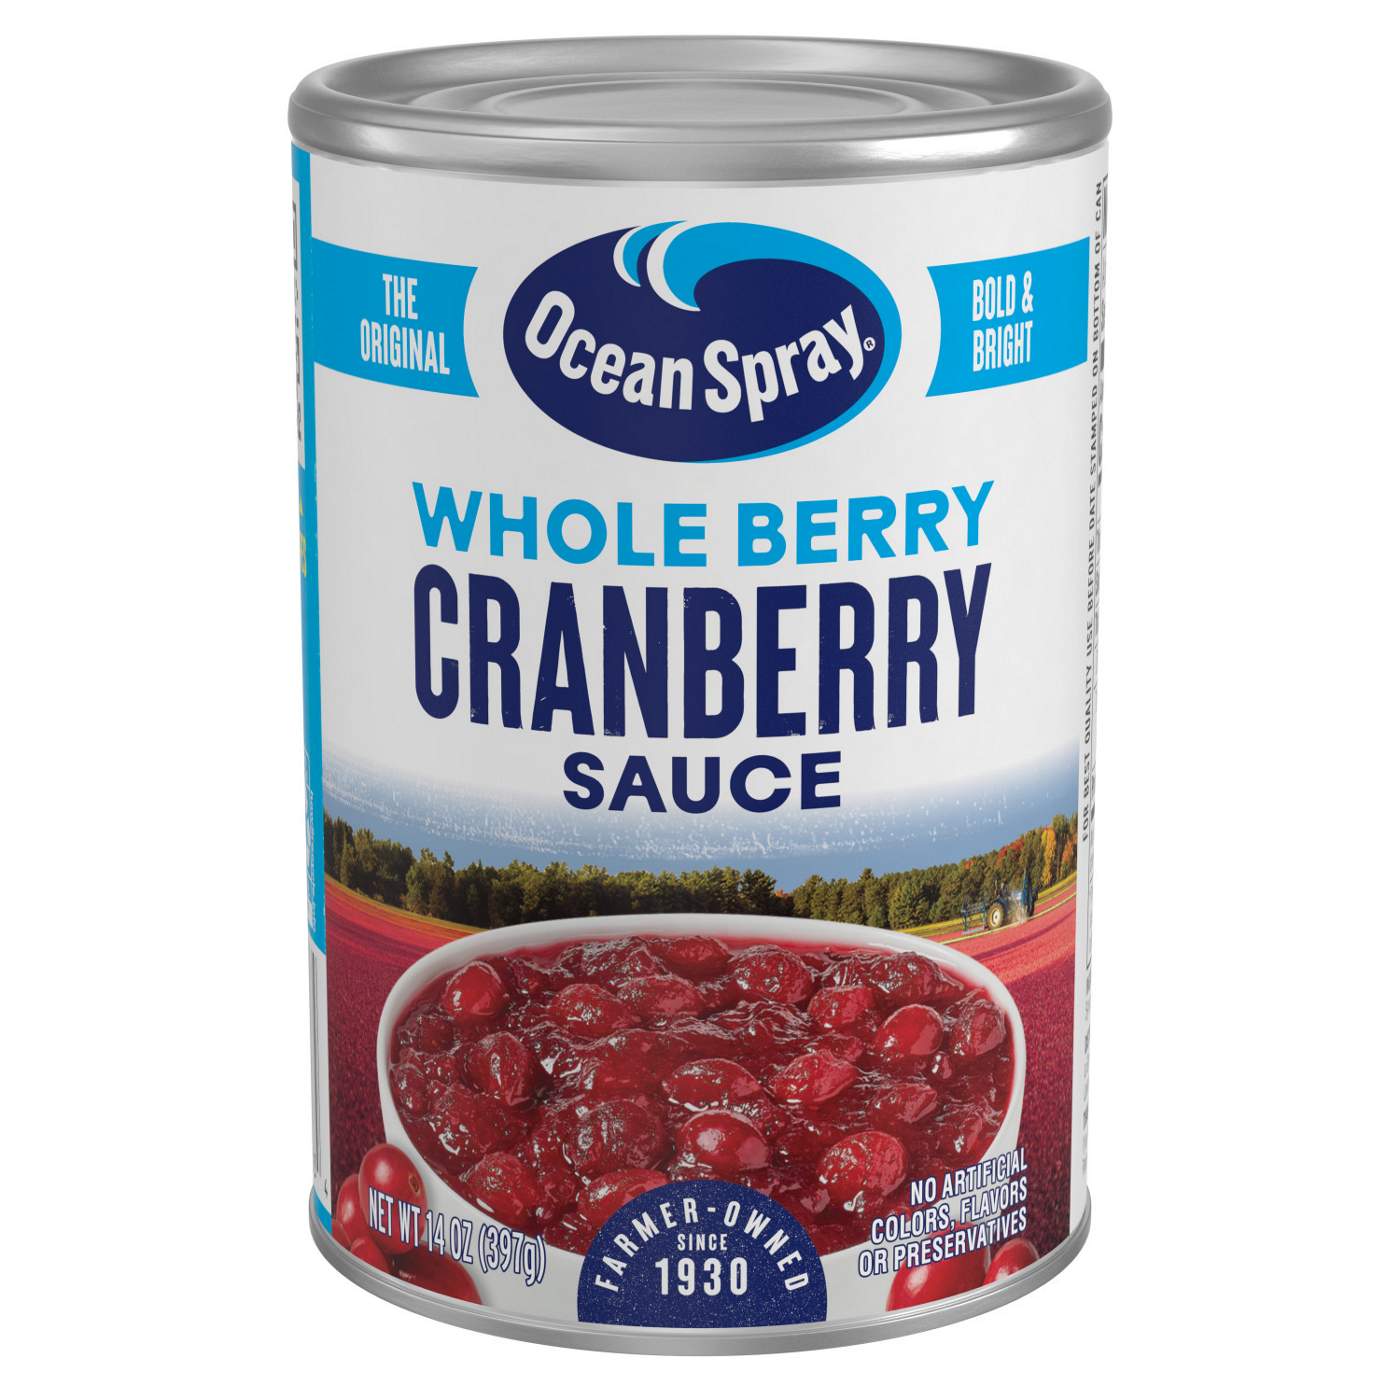 Ocean Spray Ocean Spray® Whole Cranberry Sauce, Canned Side Dish, 14 Oz Can; image 1 of 6